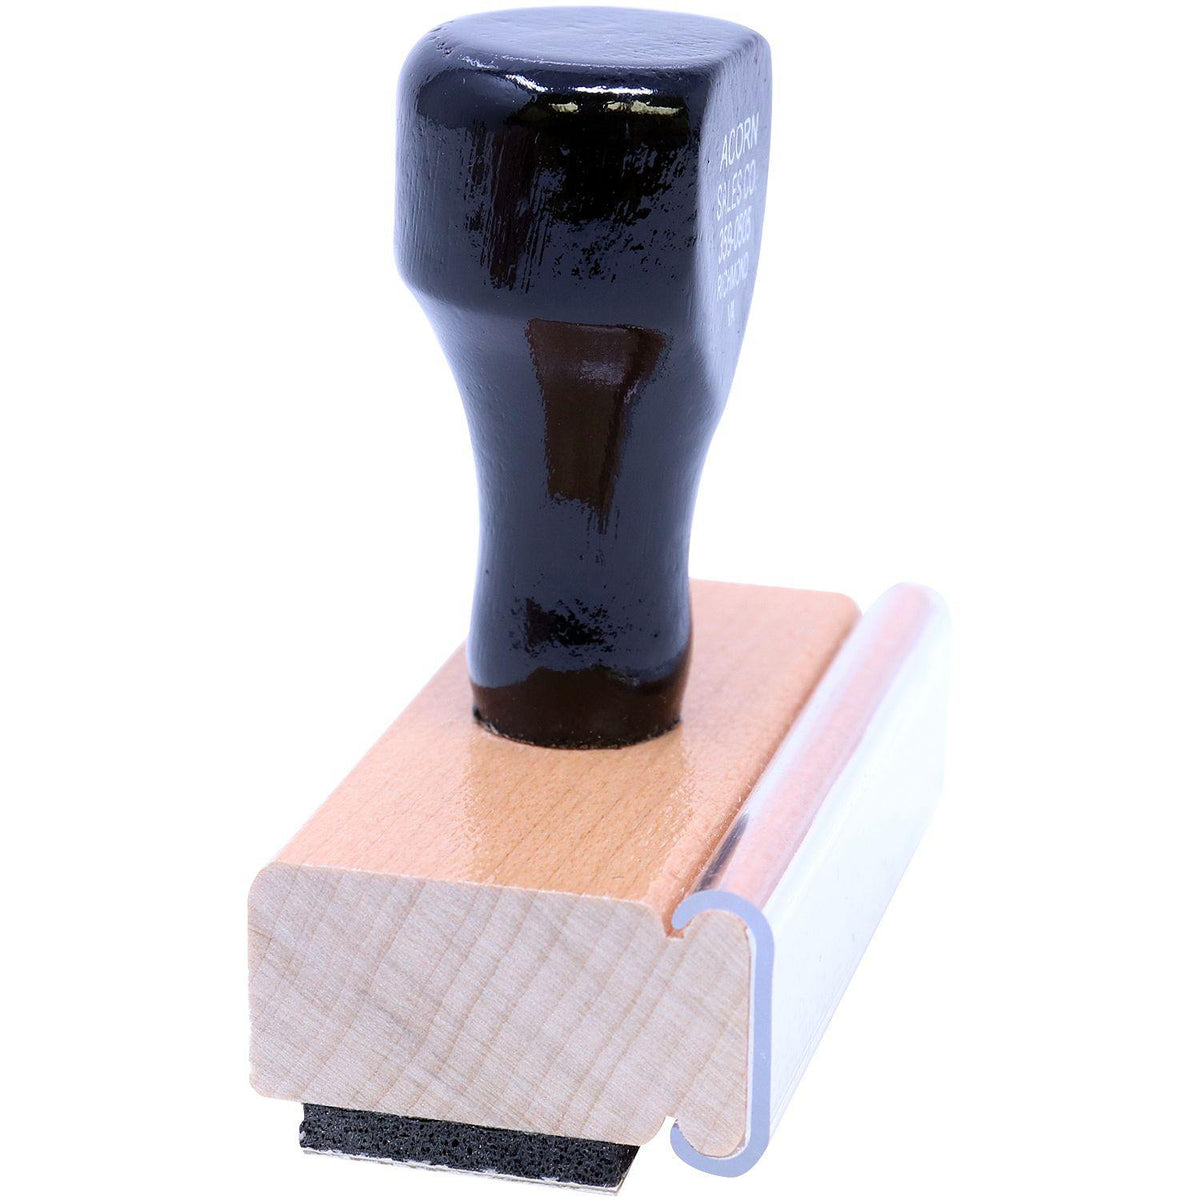 Side View of Large Air Mail Rubber Stamp at an Angle